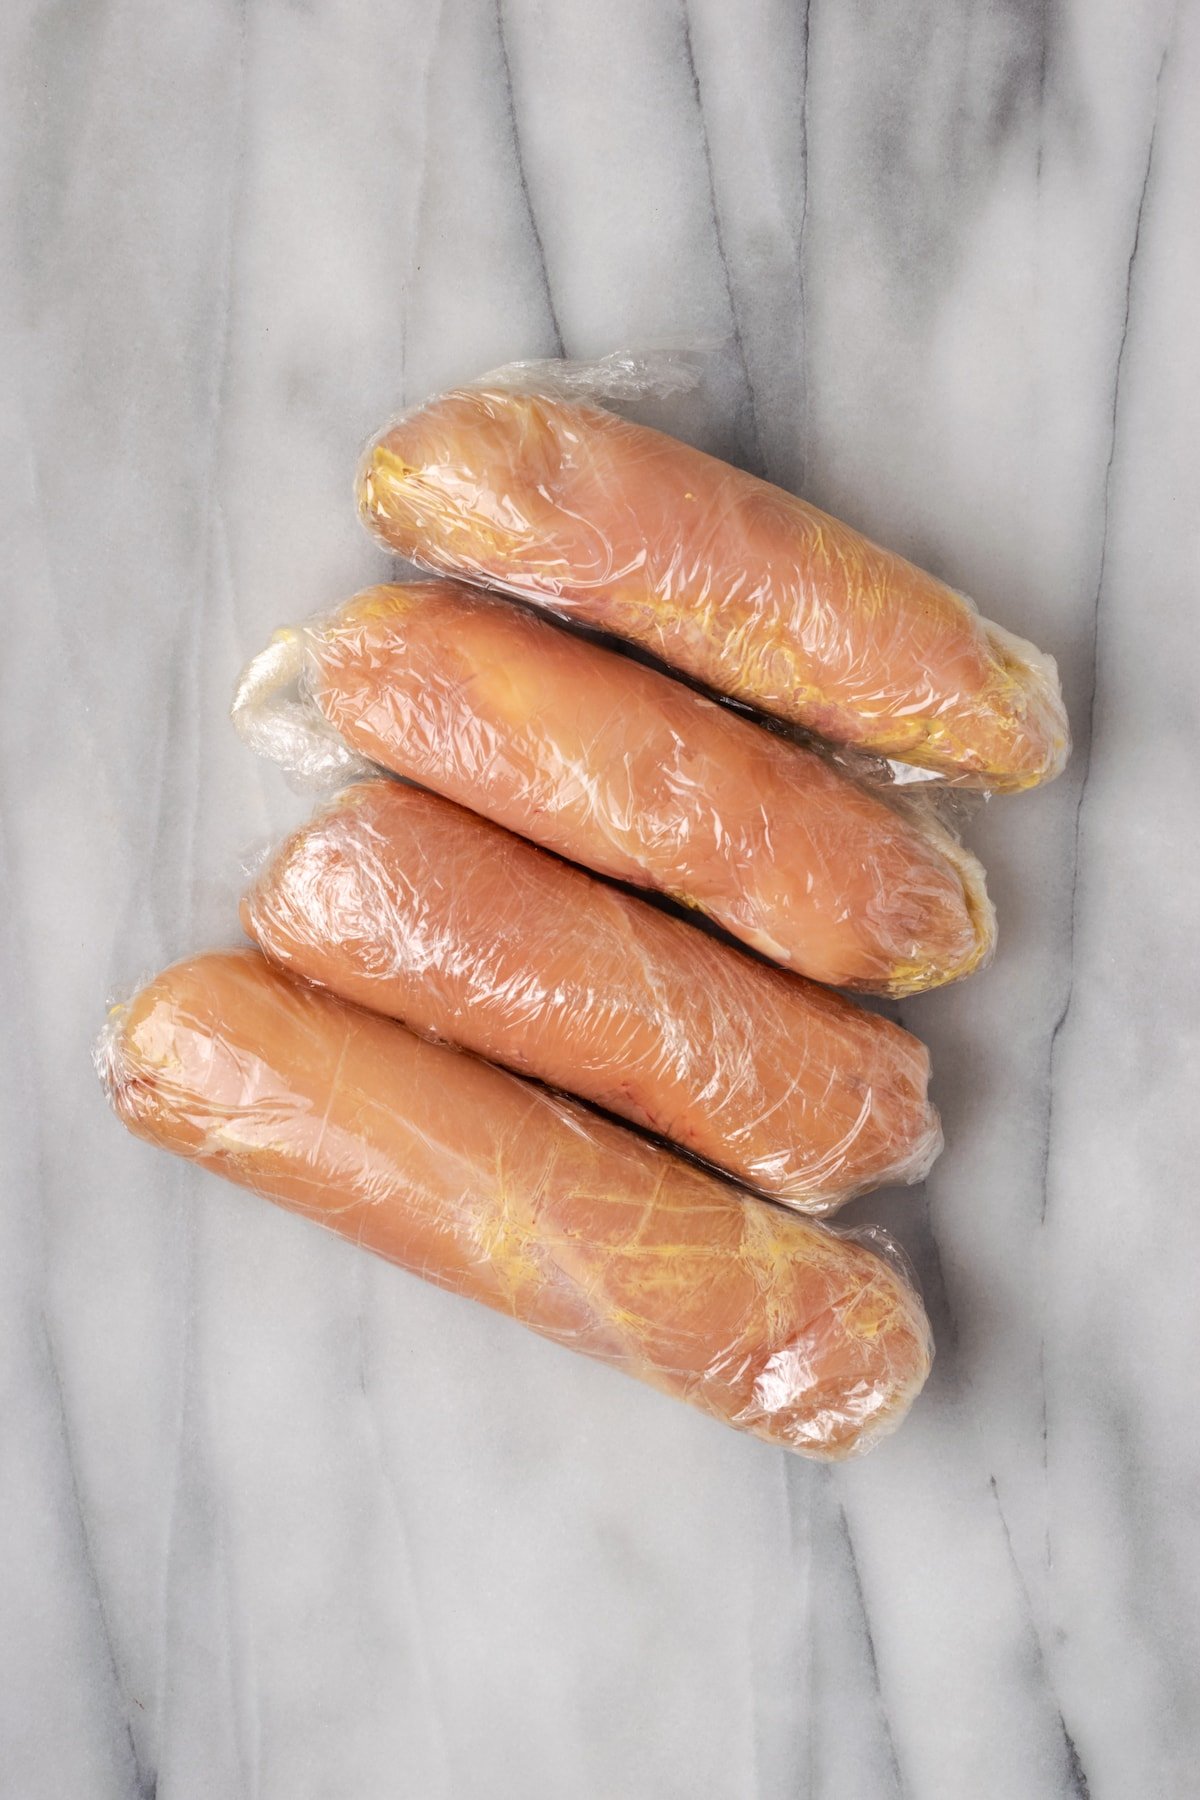 Four rolled up logs of stuffed chicken breasts, covered in plastic wrap